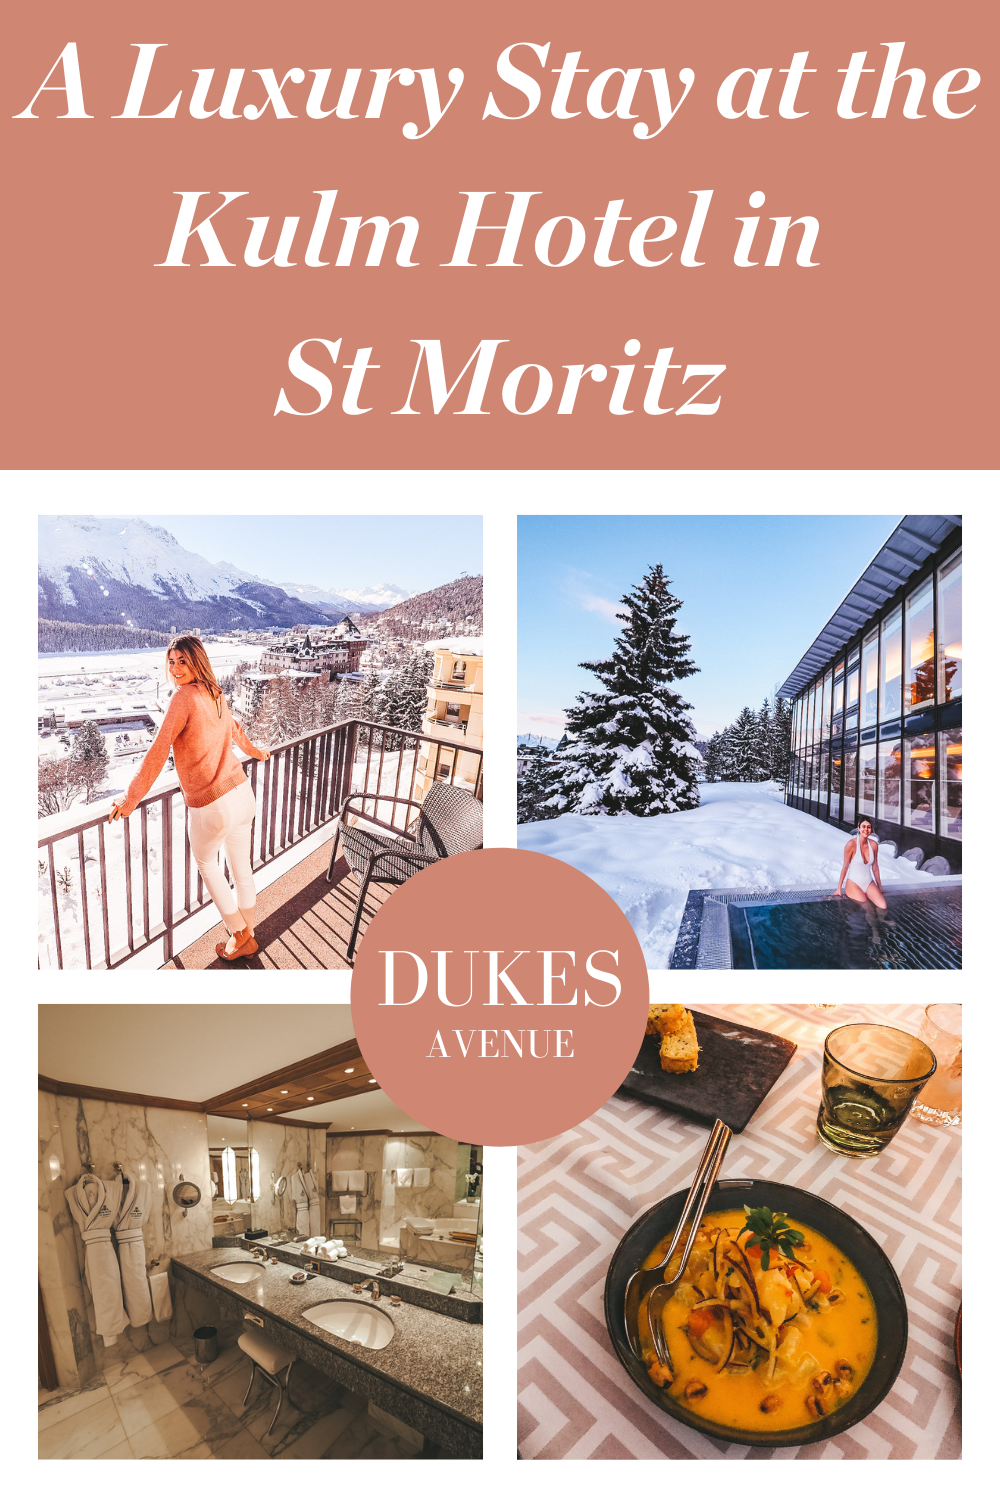 Woman looking at the mountainous view from the balcony of a hotel room, woman sitting on the edge of a pool with a snowy tree behind her, a hotel bathroom and dish from a restaurant with text overlay "A Luxury Stay at the Kulm Hotel in St Moritz"